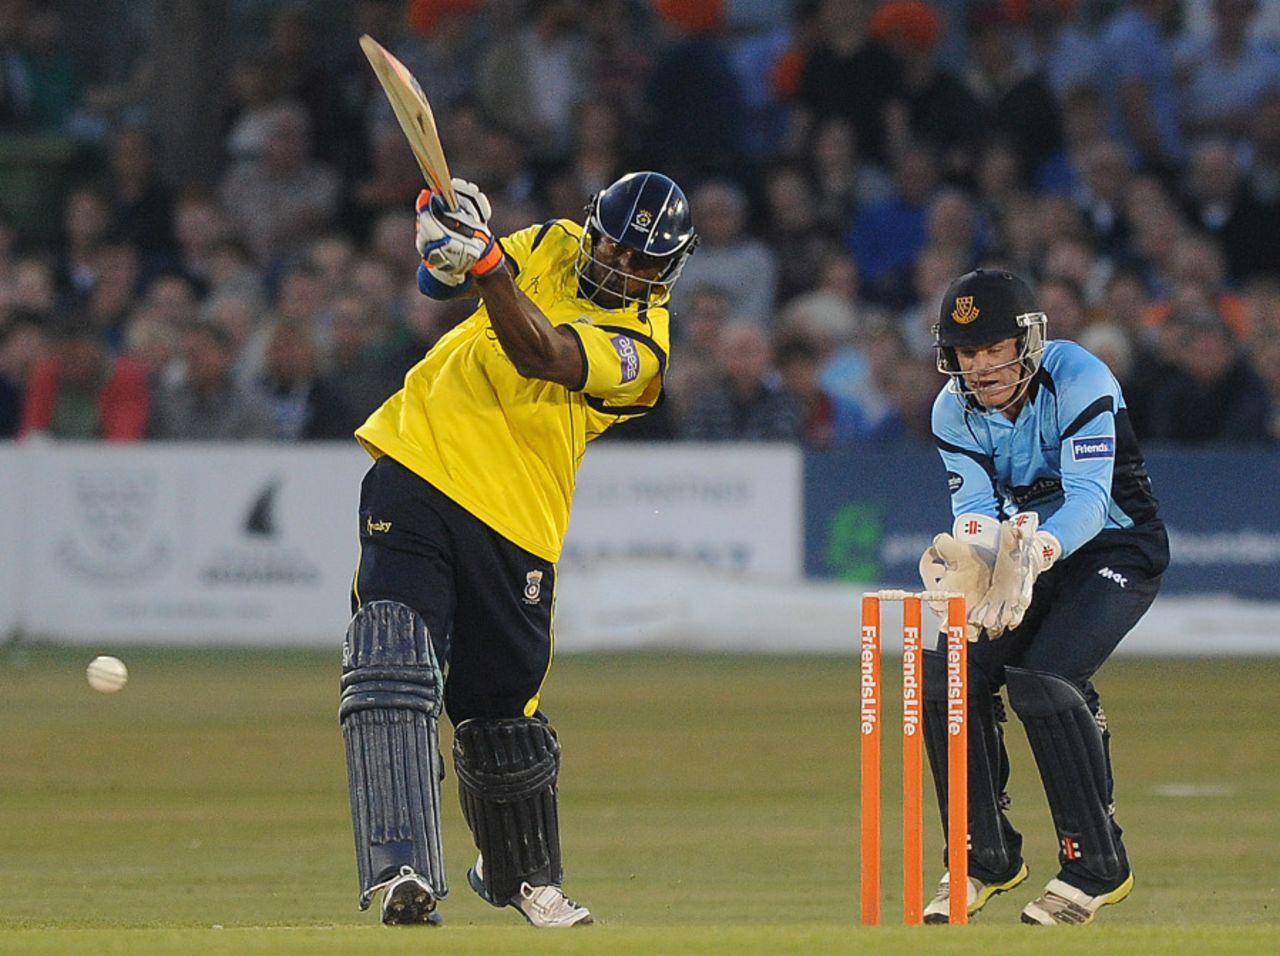 Michael Carberry's 31-ball 50 gave Hampshire's chase early momentum, Sussex v Hampshire, FLt20, South Group, Hove, July 5, 2013